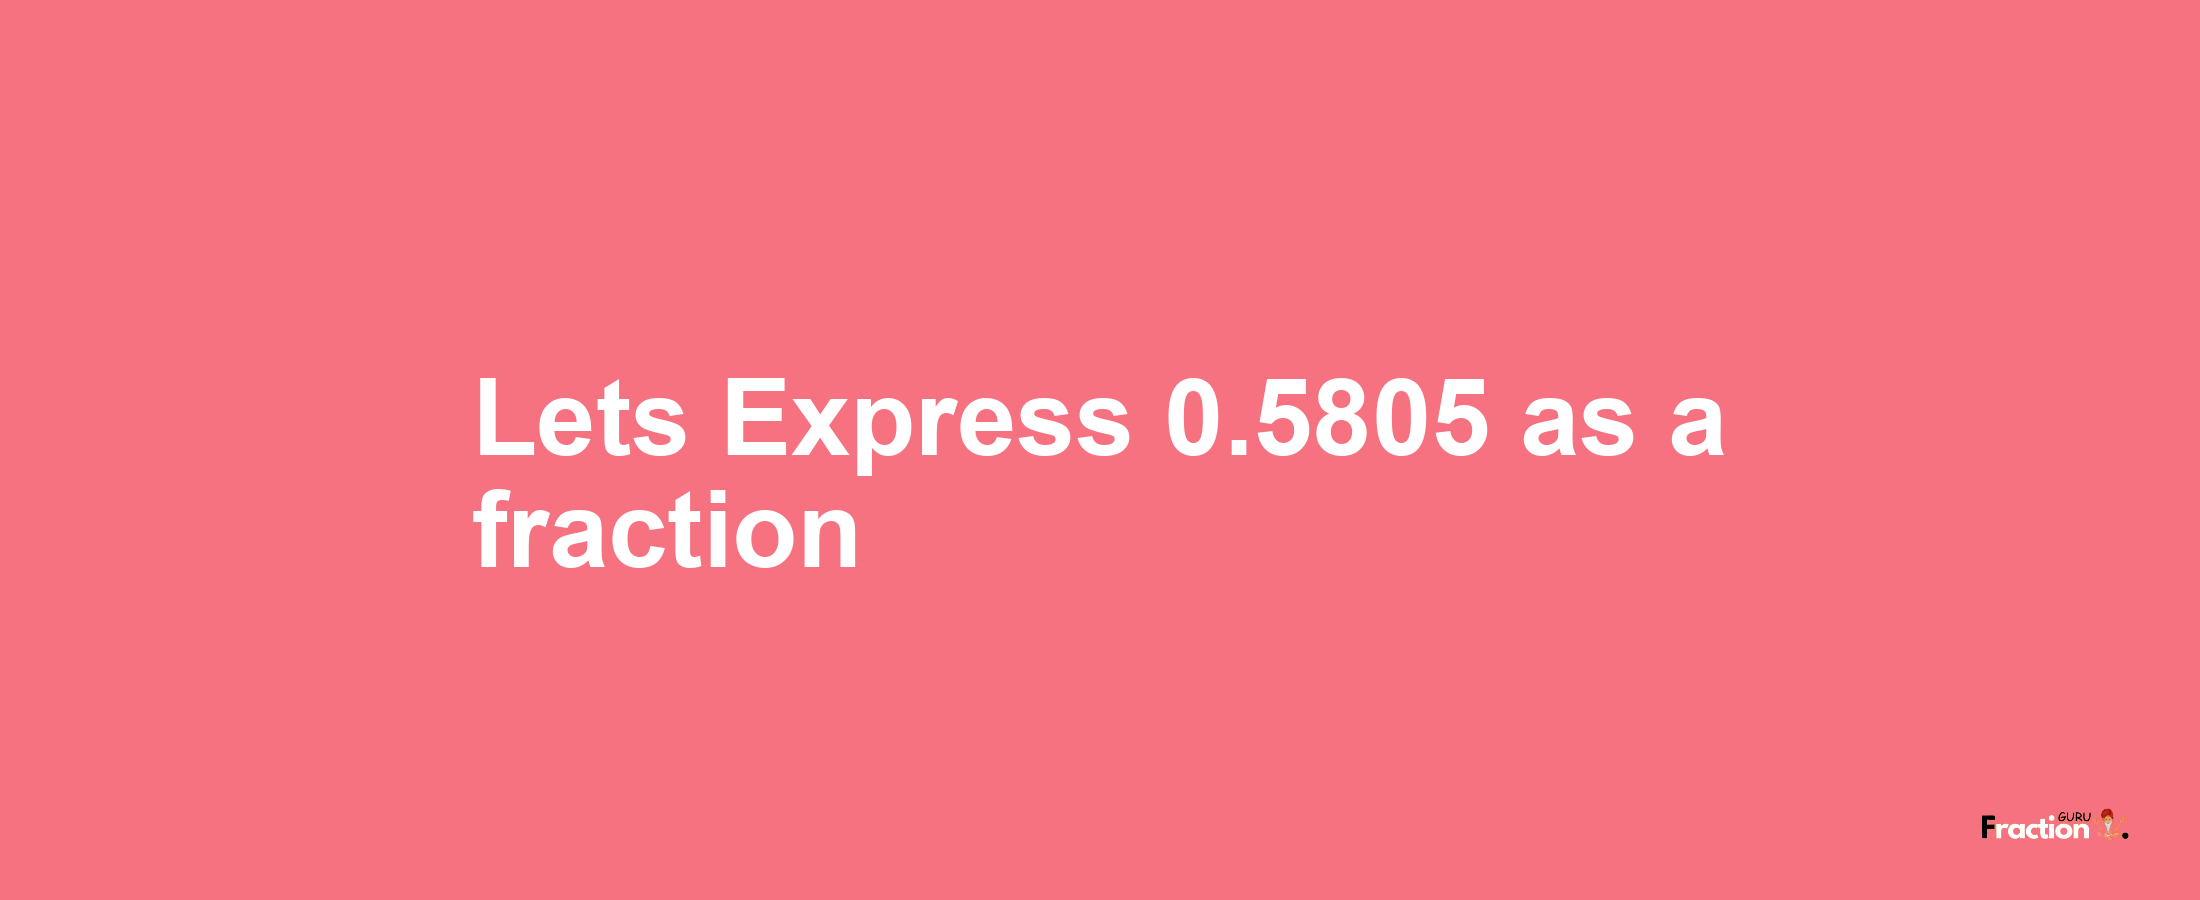 Lets Express 0.5805 as afraction